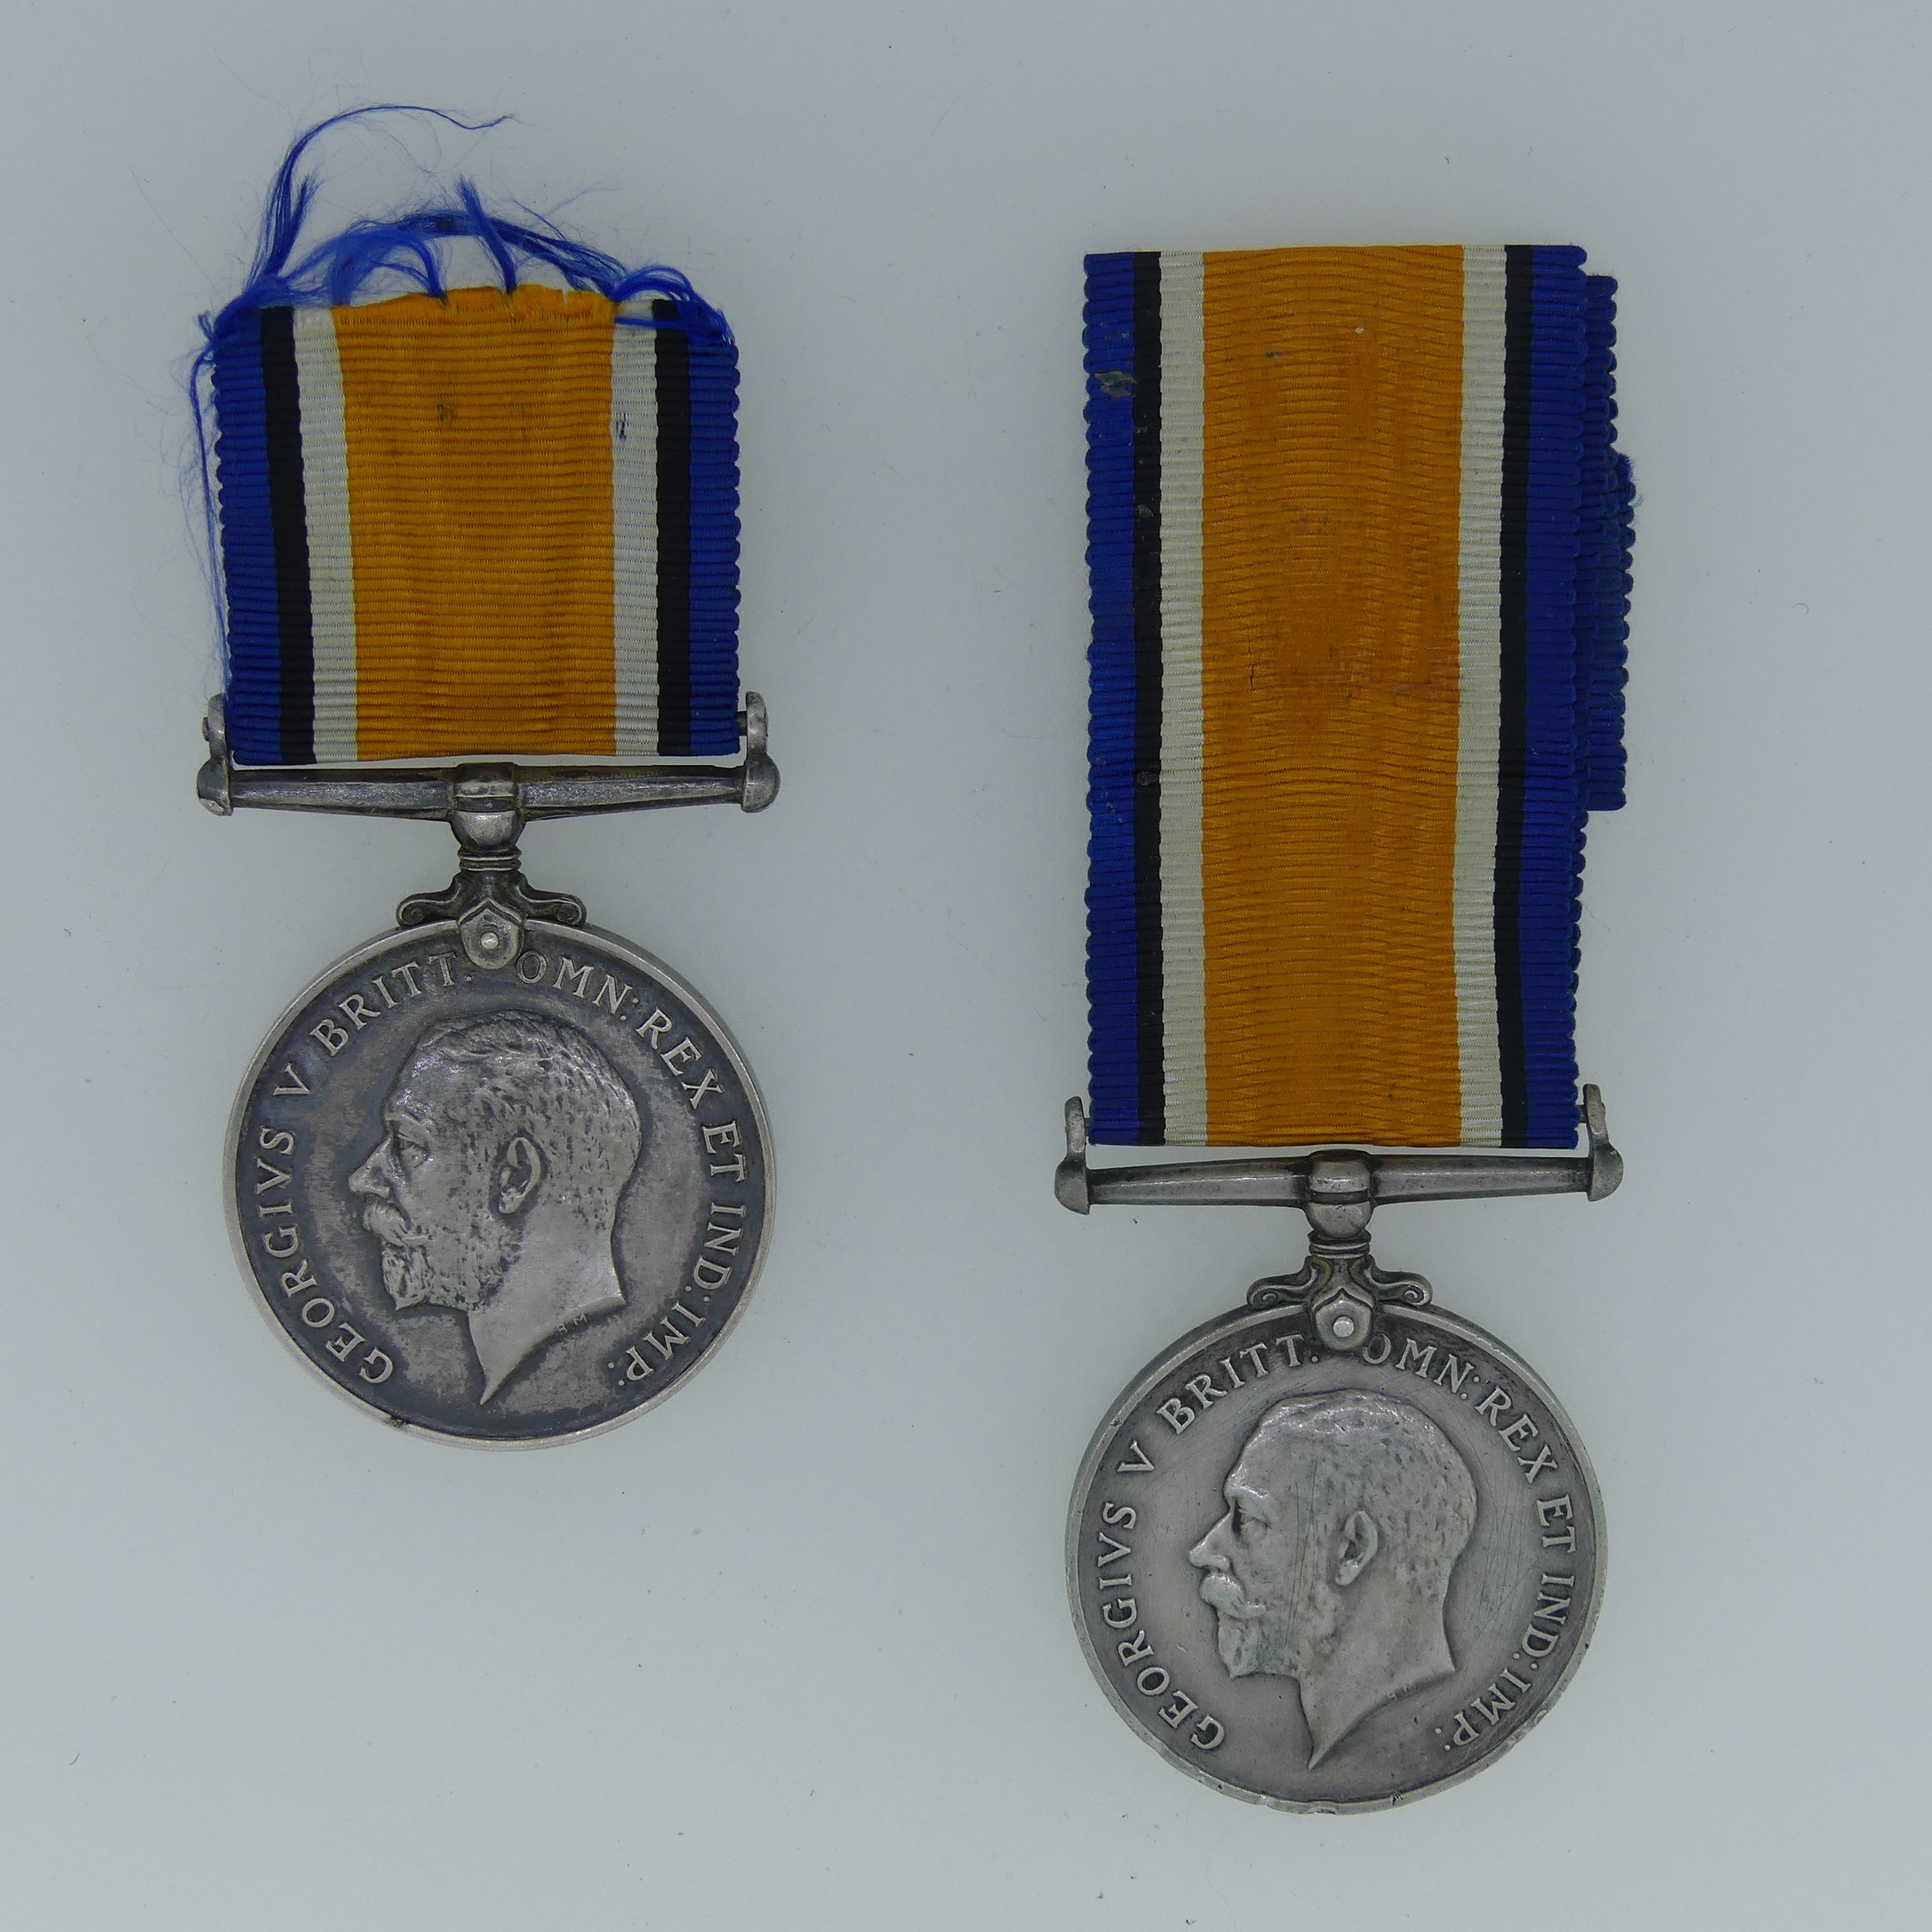 British War Medals (2) 25424 Pte. W. Gibbons Scottish Rifles and 20863 Pte. R. M. Bell Scottish